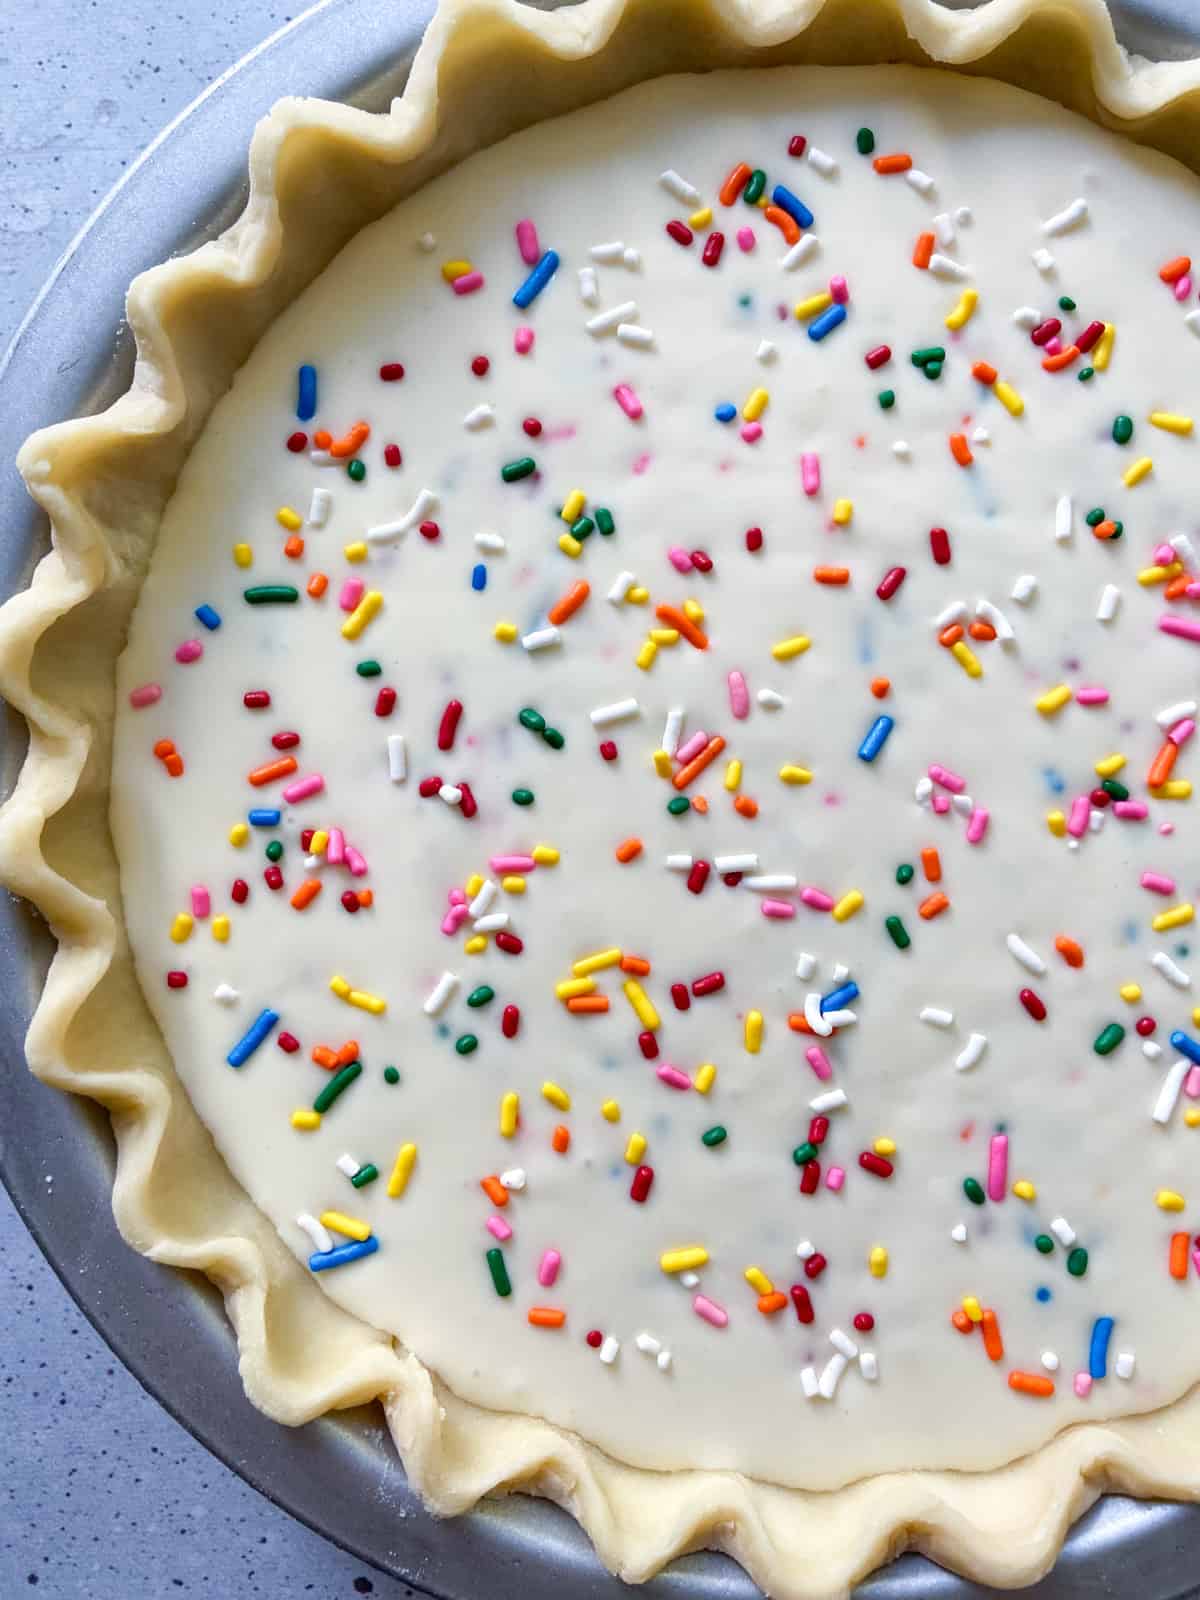 Funfetti cream cheese filling in an unbaked pie crust.